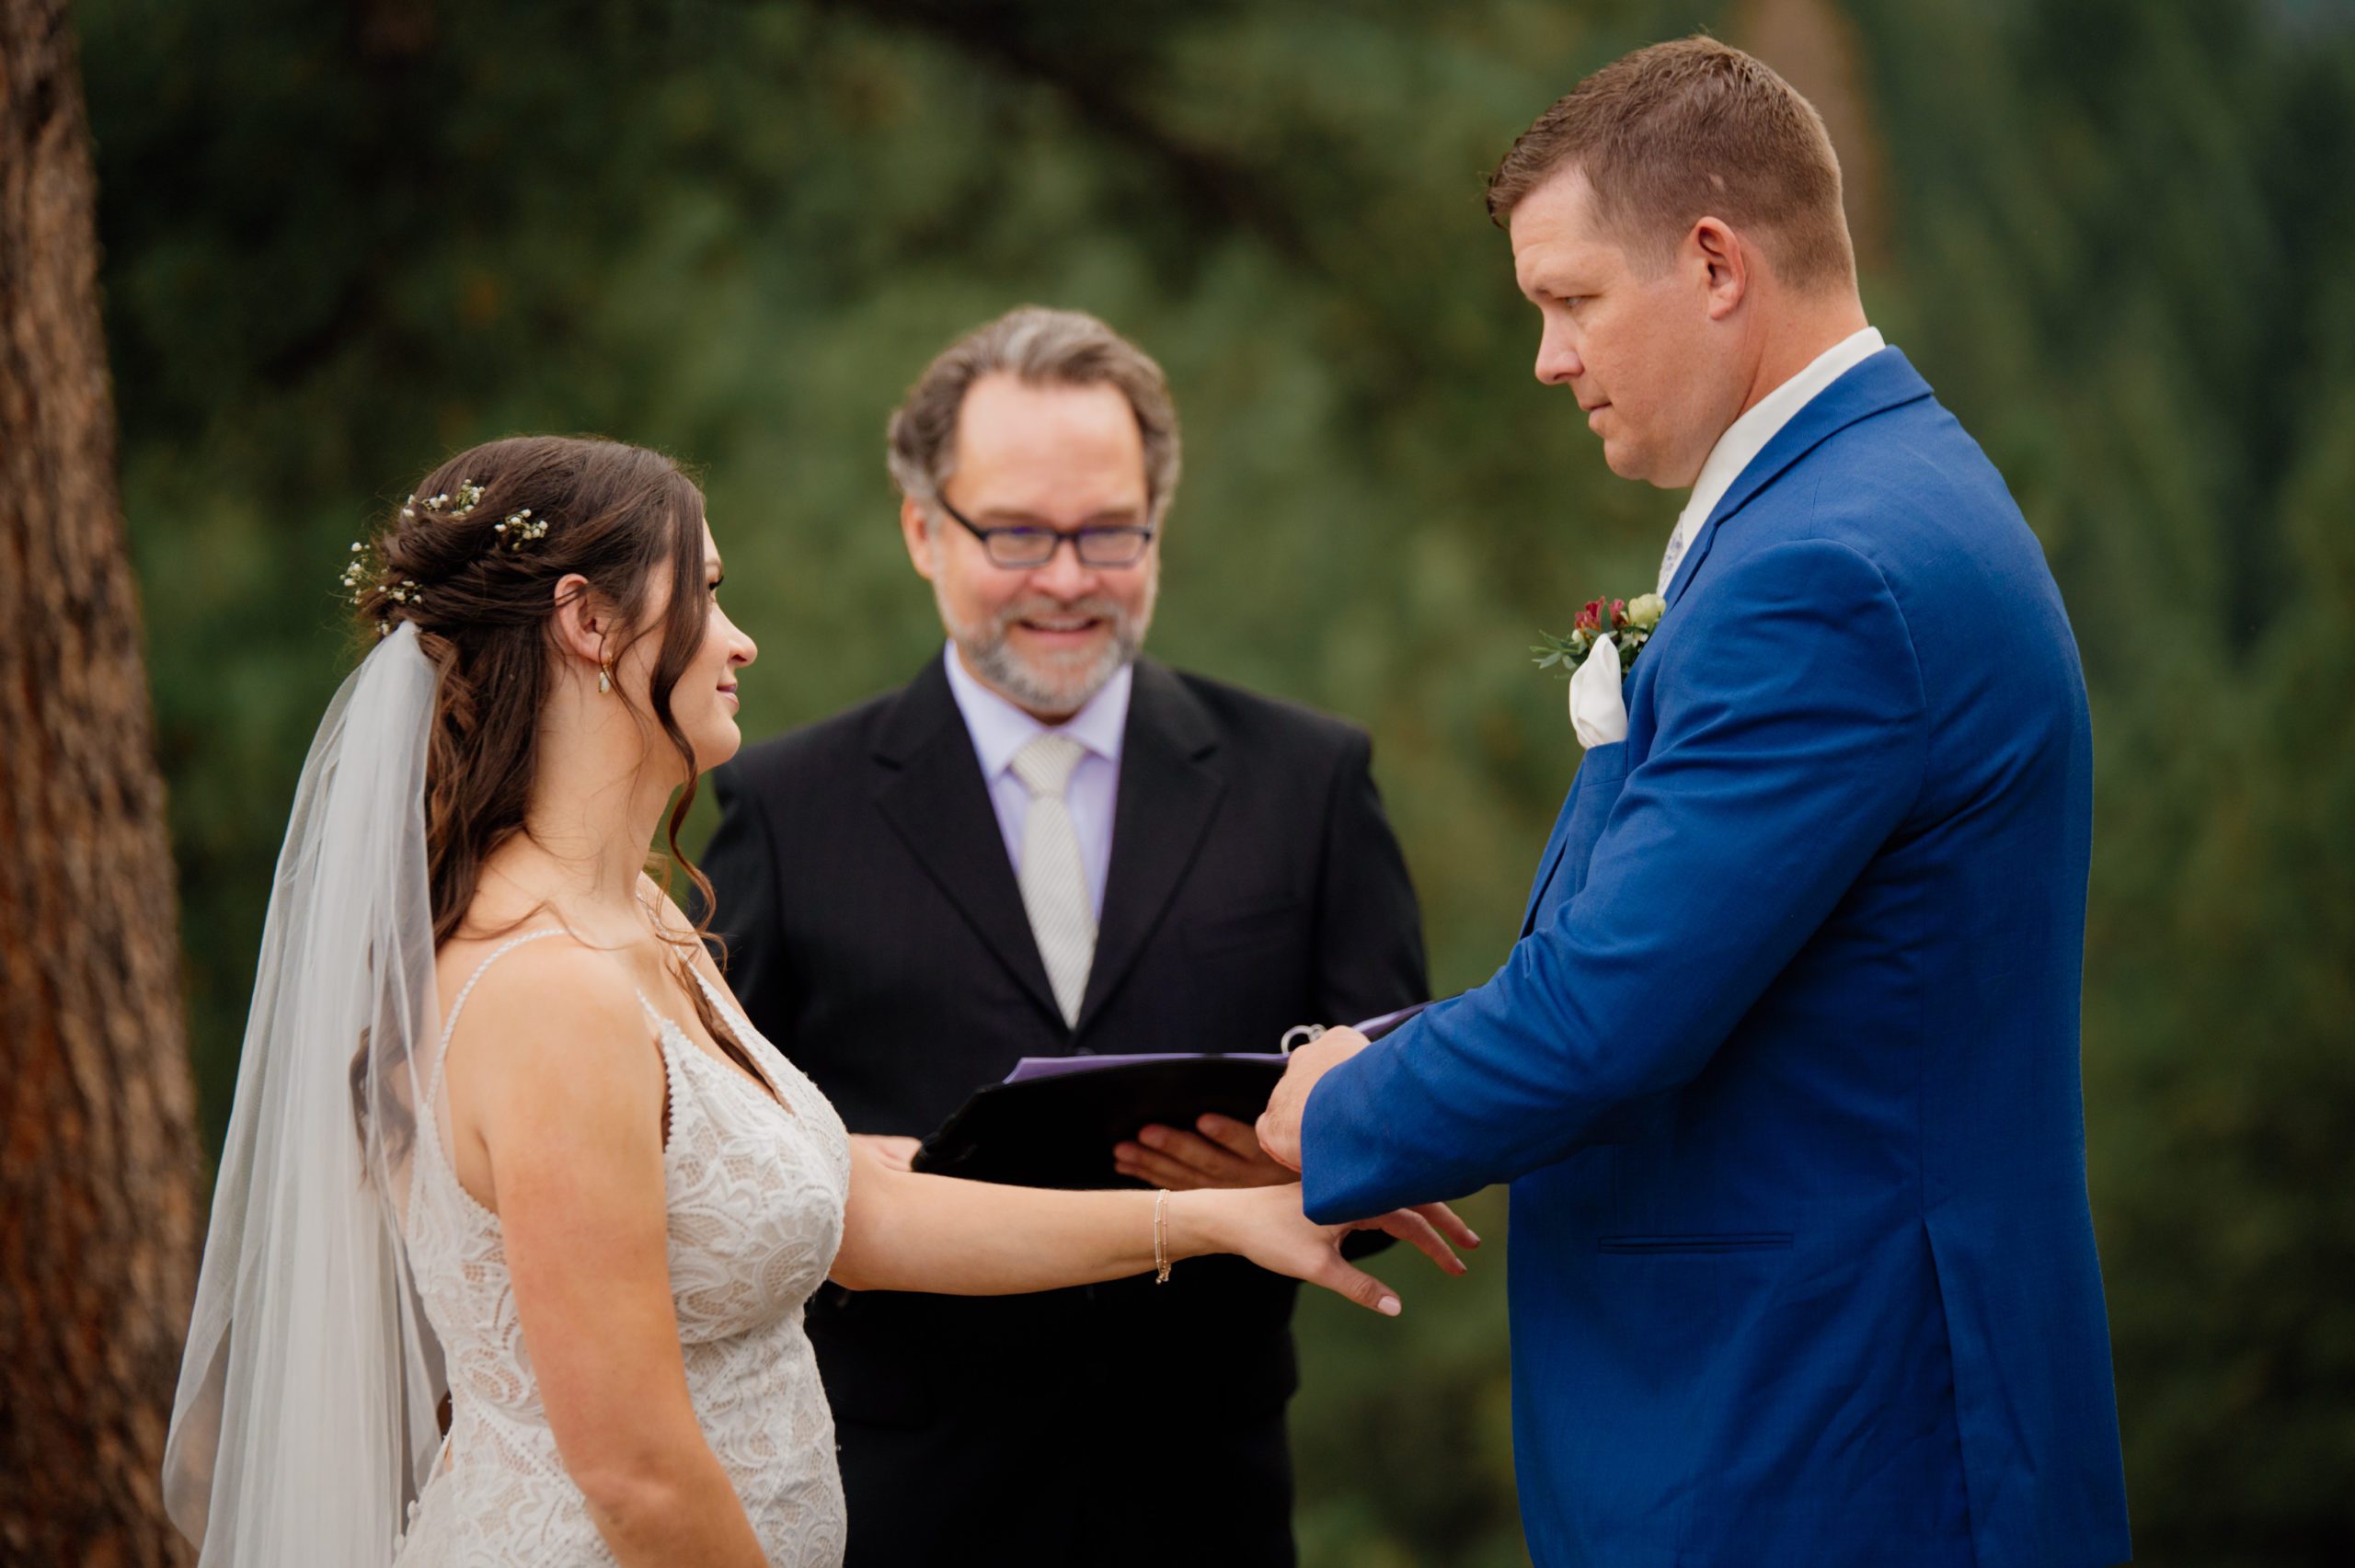 The groom places the ring on his bride's hand at their artist point elopement ceremony. 